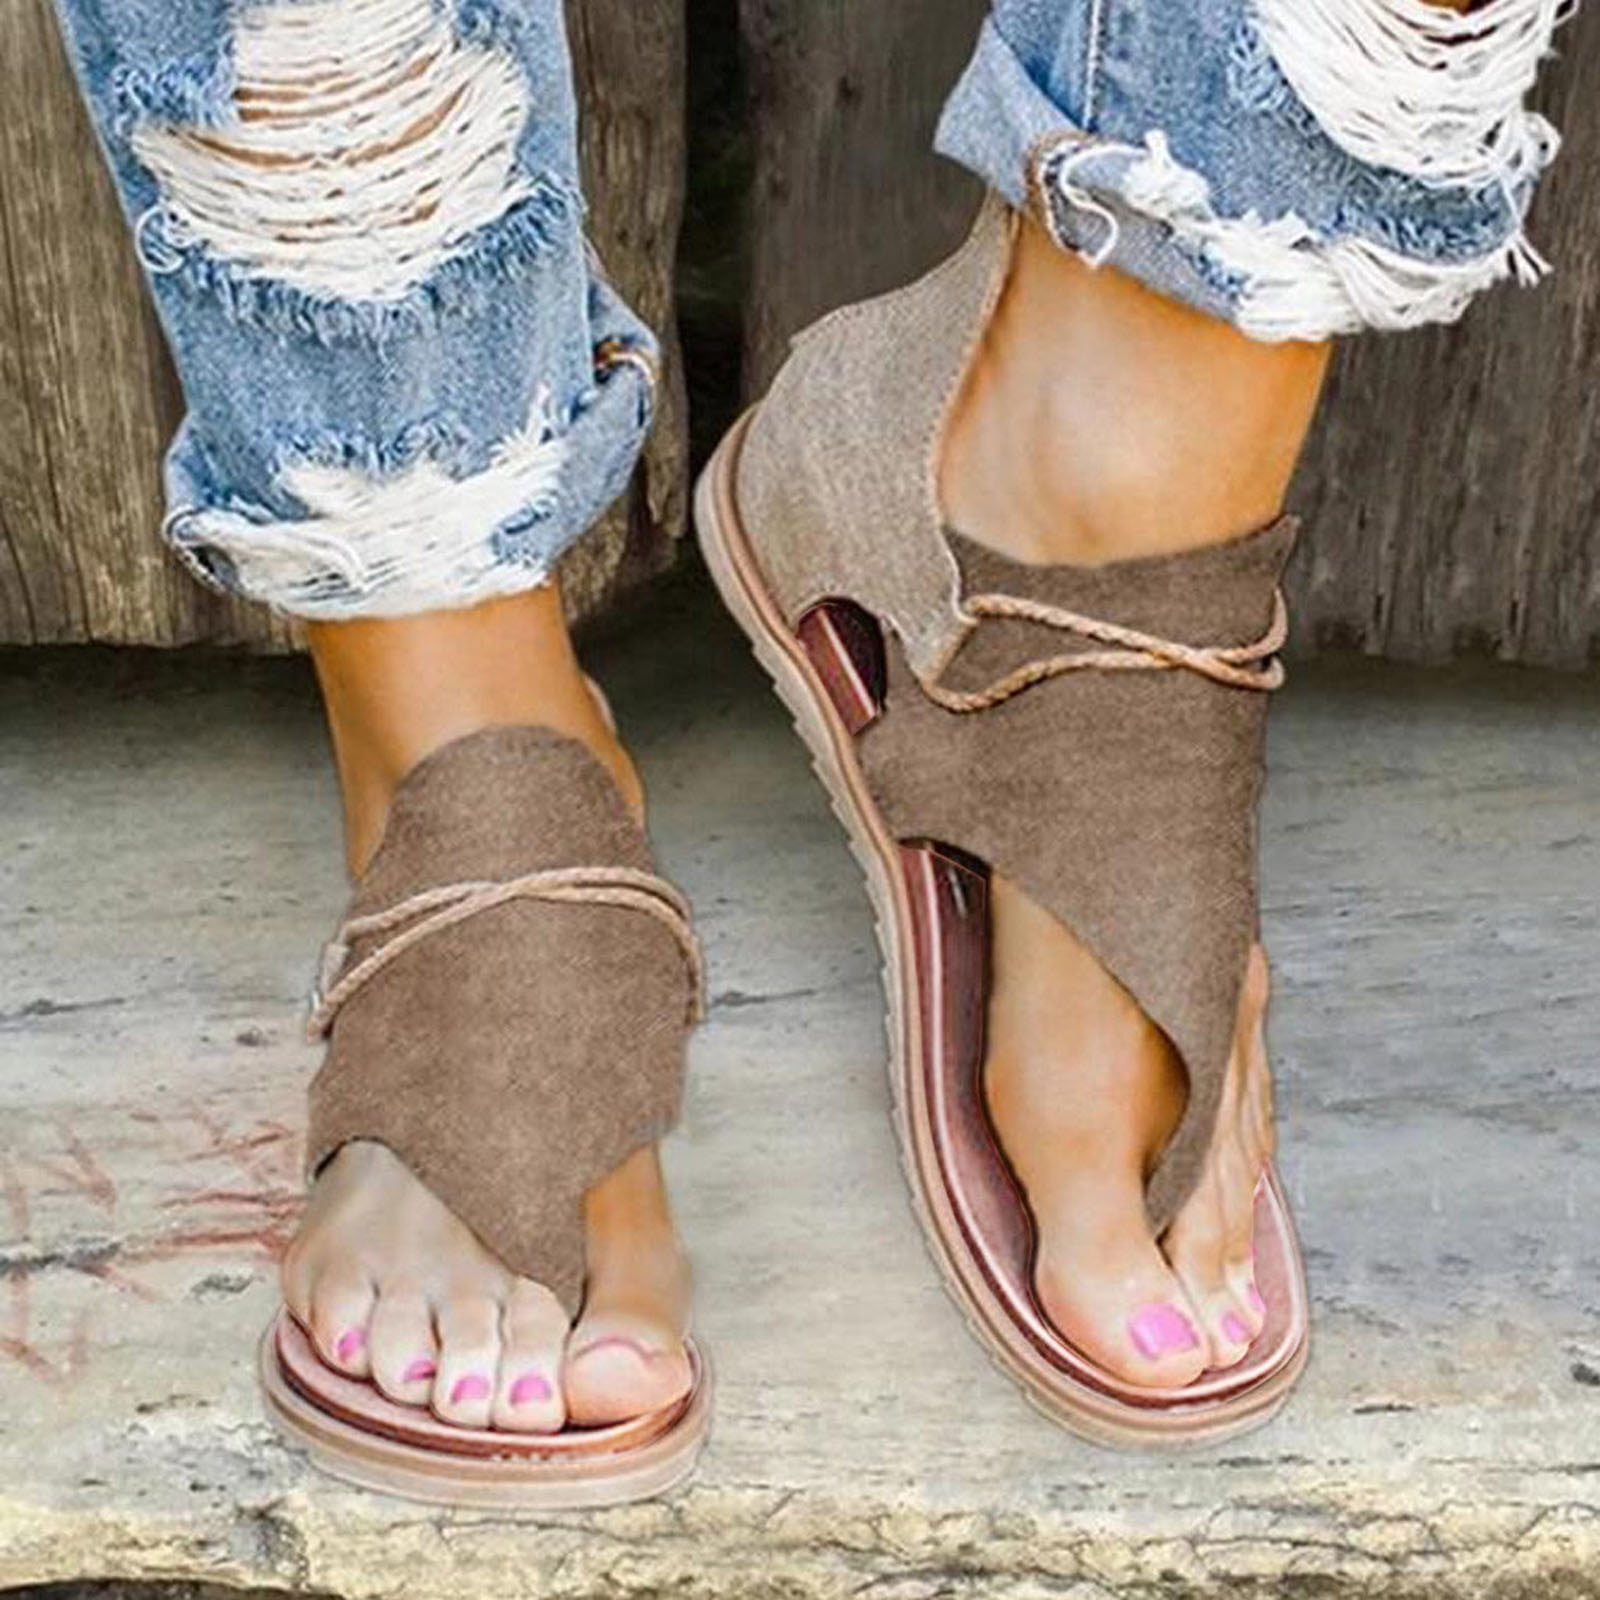 How To Wear Knee-High Sandals This Summer | Gladiator sandals outfit, Fashion  clothes women, Summer outfits